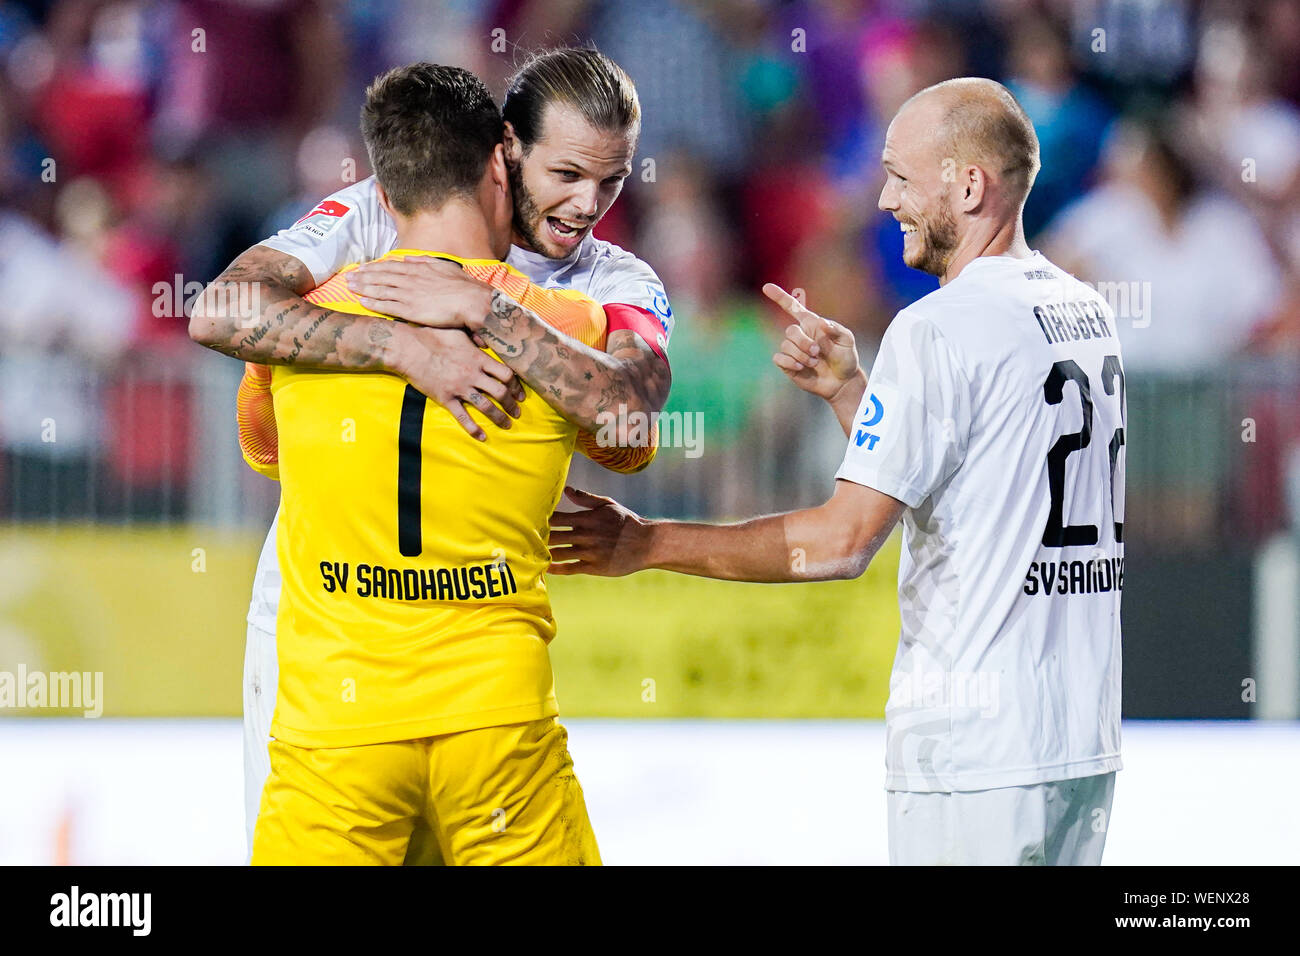 30 August 2019, Baden-Wuerttemberg, Sandhausen: Soccer: 2nd Bundesliga, SV Sandhausen - SV Darmstadt 98, 5th matchday, in Hardtwaldstadion. Sandhausen's goalkeeper Martin Fraisl (l-r), Sandhausen's Dennis Diekmeier and Sandhausen's Gerrit Nauber are happy about the victory after the end of the game. Photo: Uwe Anspach/dpa - IMPORTANT NOTE: In accordance with the requirements of the DFL Deutsche Fußball Liga or the DFB Deutscher Fußball-Bund, it is prohibited to use or have used photographs taken in the stadium and/or the match in the form of sequence images and/or video-like photo sequences. Stock Photo